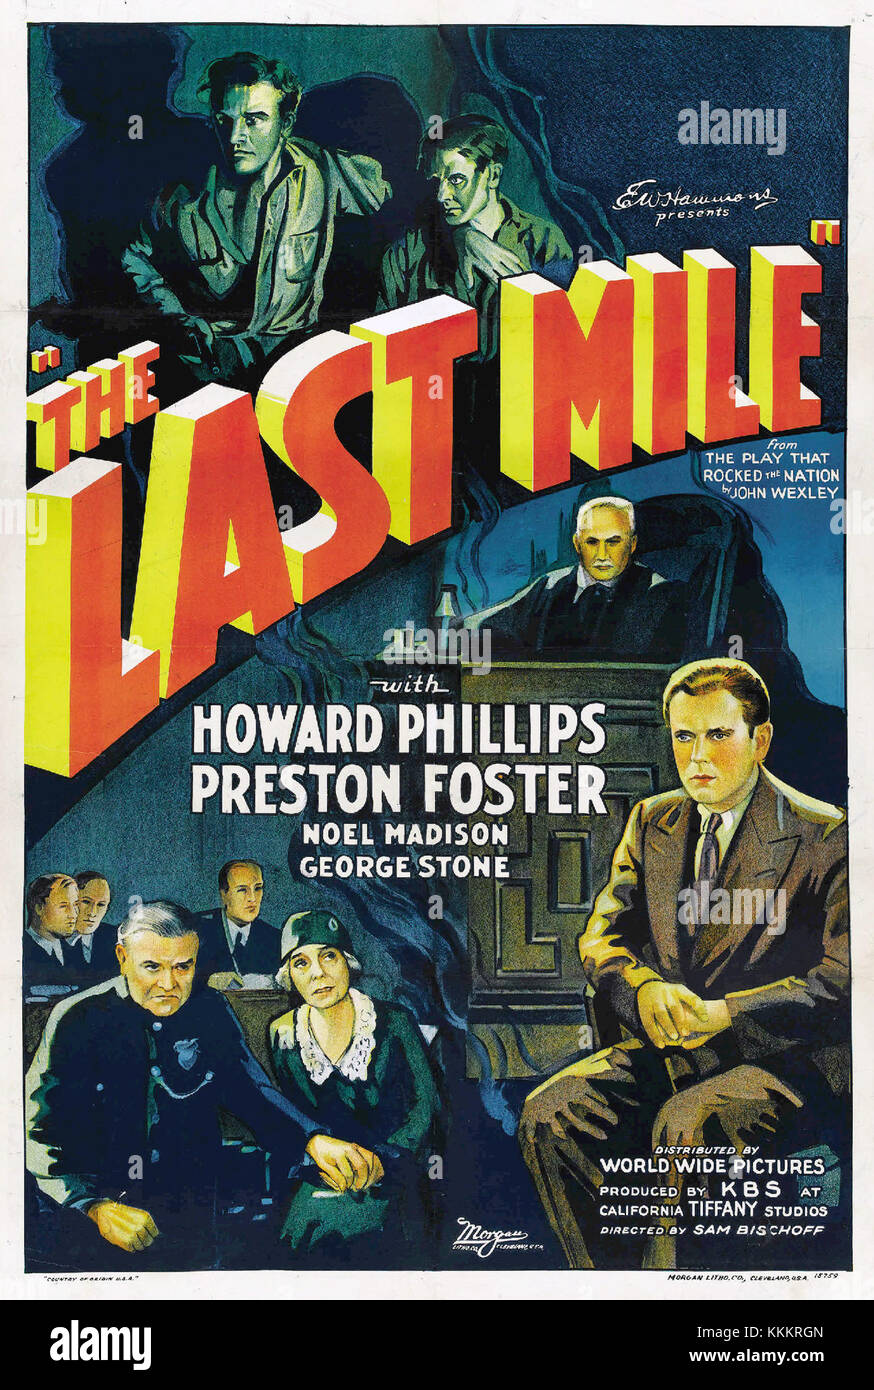 The Last Mile FilmPoster Stock Photo